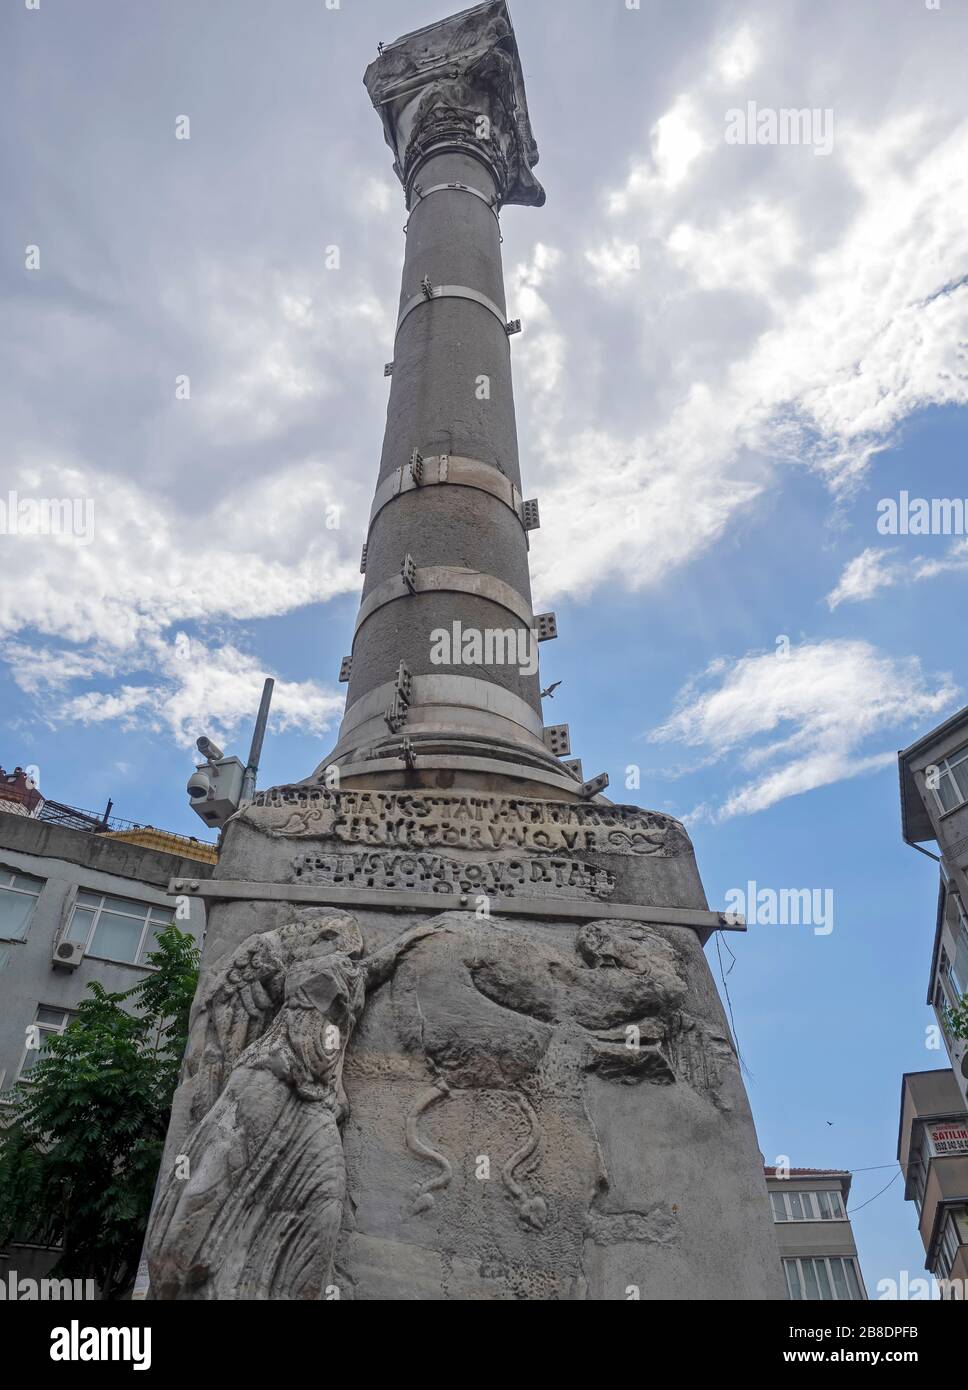 The Kiztasi or Markianos Column. A monument commemorating the Byzantine Emperor Markianos in Istanbul in 455. It is located in Fatih district of Istan Stock Photo